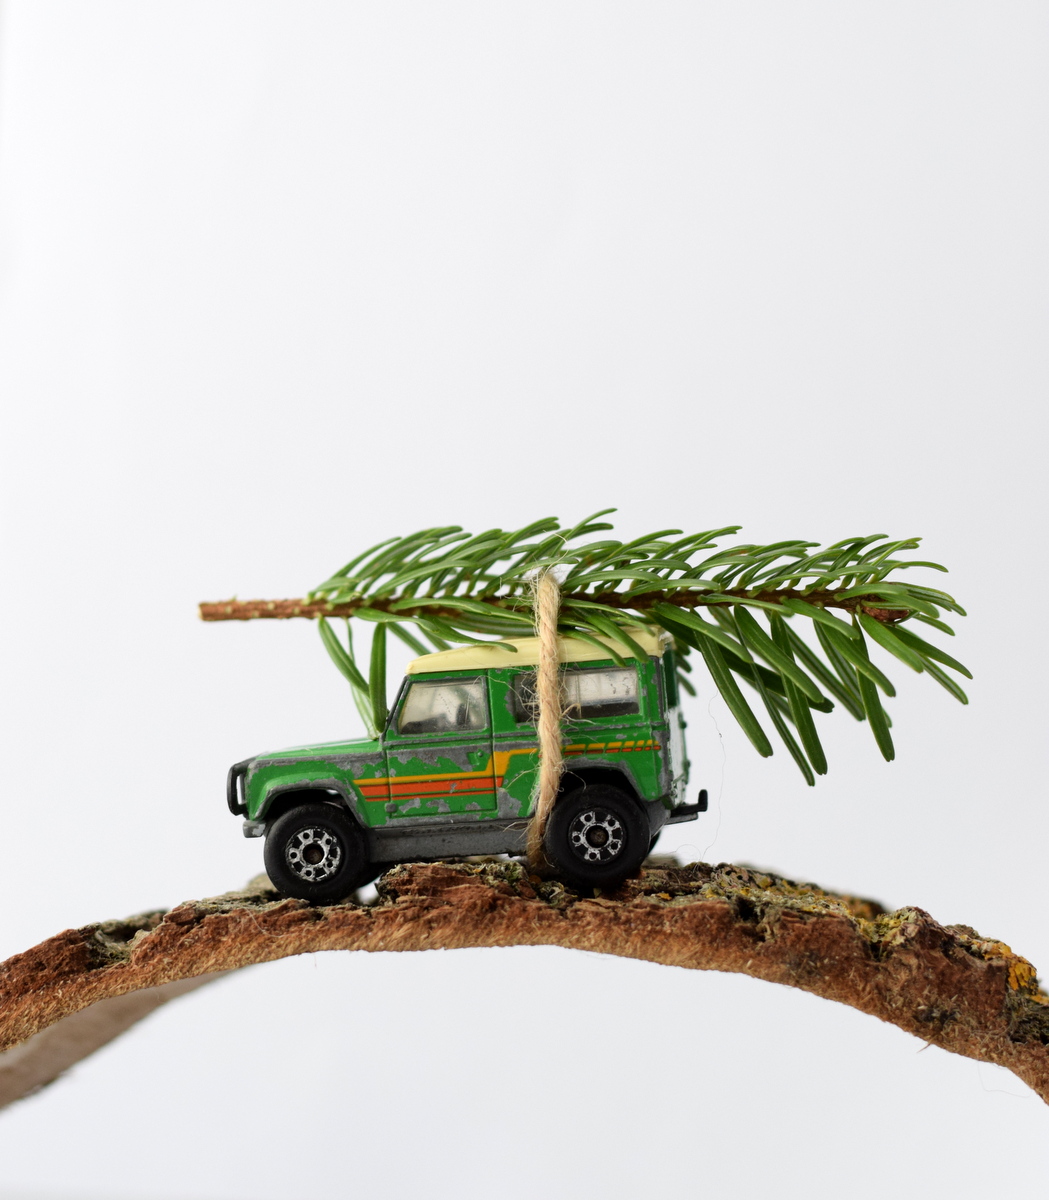 Carrying home the Christmas Tree on a Land Rover